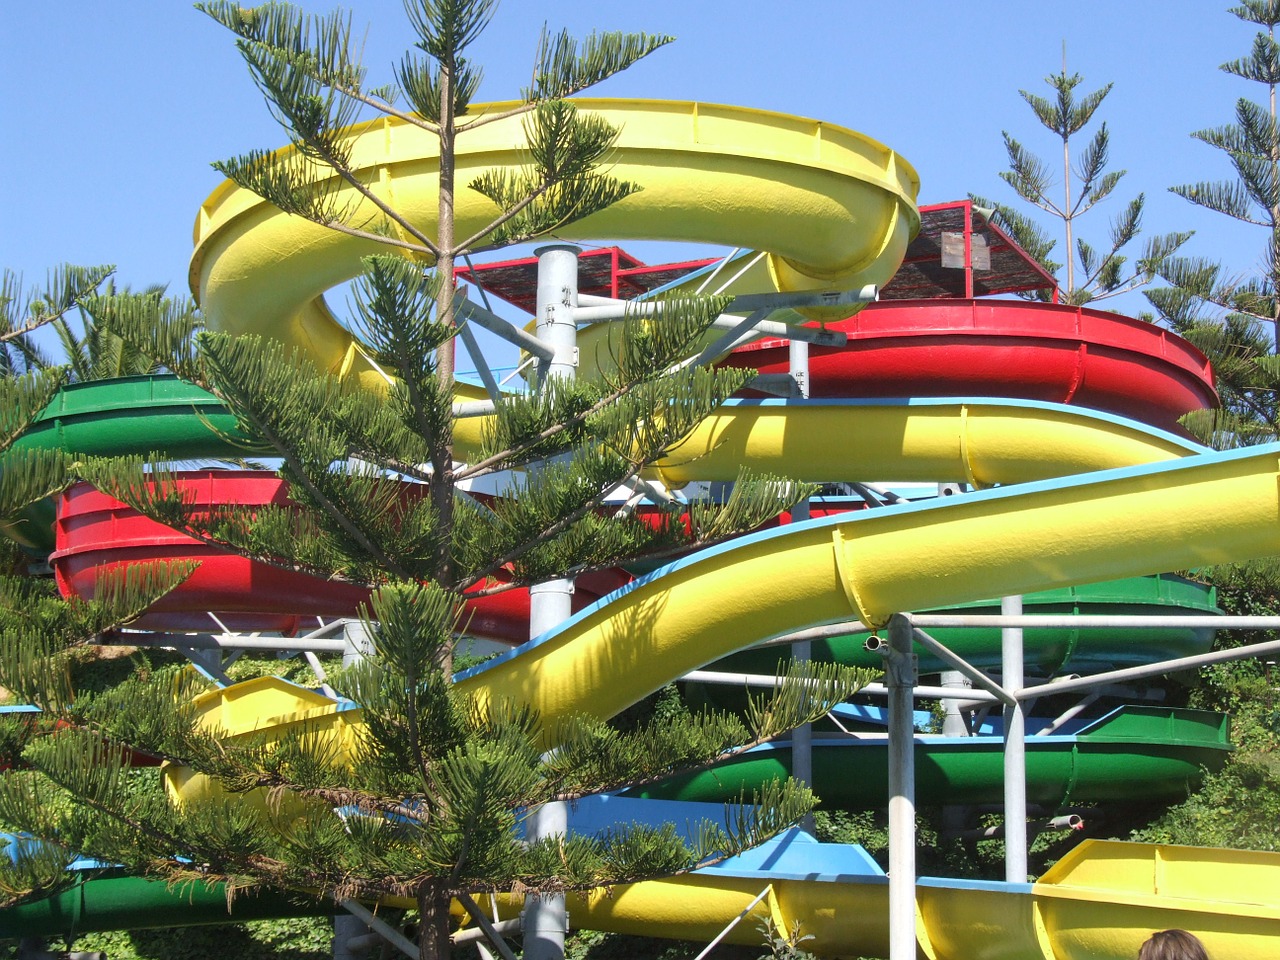 Waterslides weaving around pine trees at Waterville USA